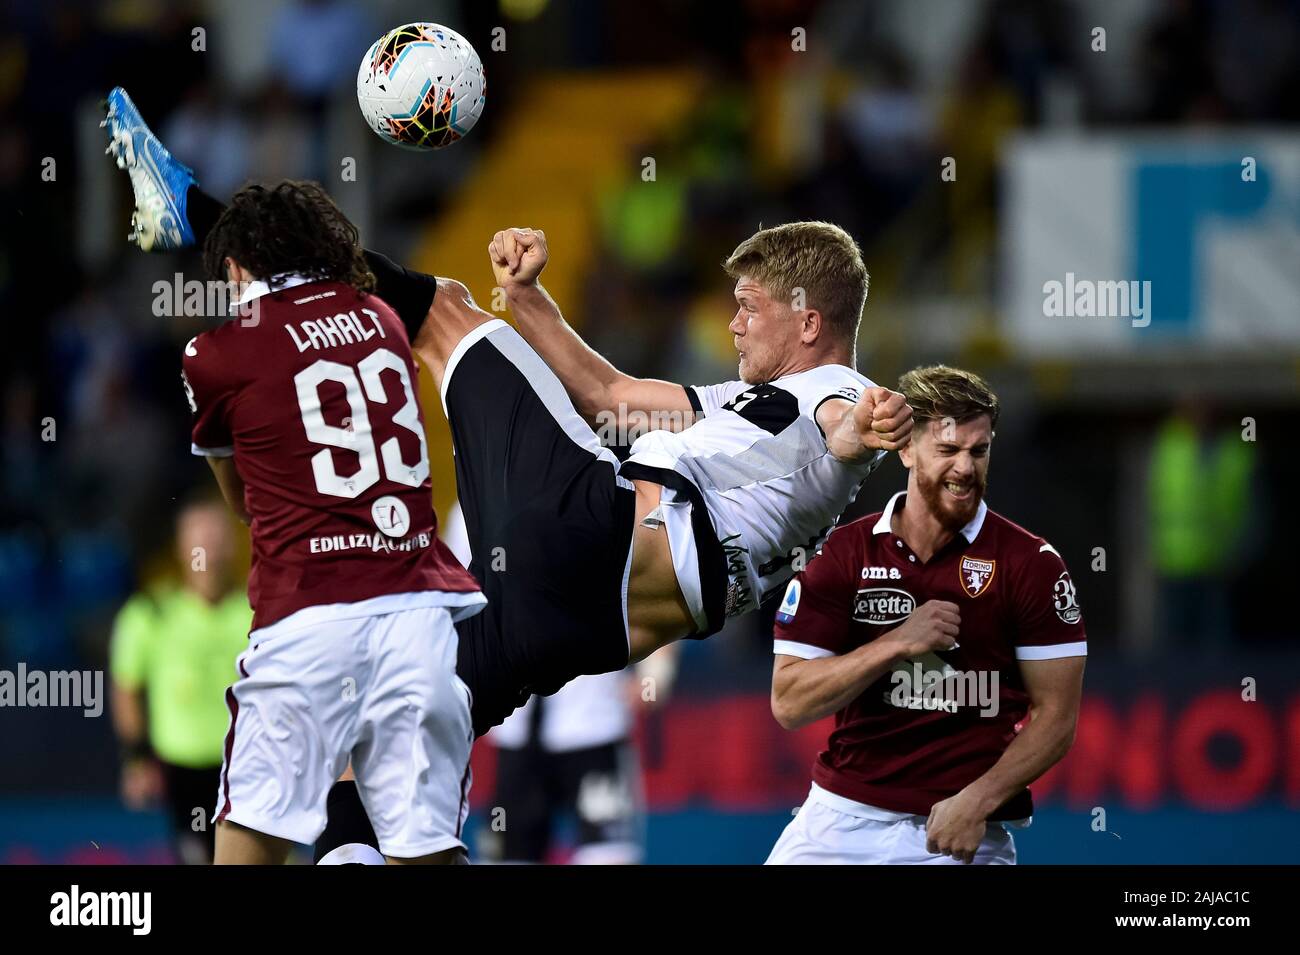 Parma, Italy. 30 September, 2019: Andreas Cornelius (C) of Parma Calcio attempts a bicycle kick during the Serie A football match between Parma Calcio and Torino FC. Parma Calcio won 3-2 over Torino FC. Credit: Nicolò Campo/Alamy Live News Stock Photo